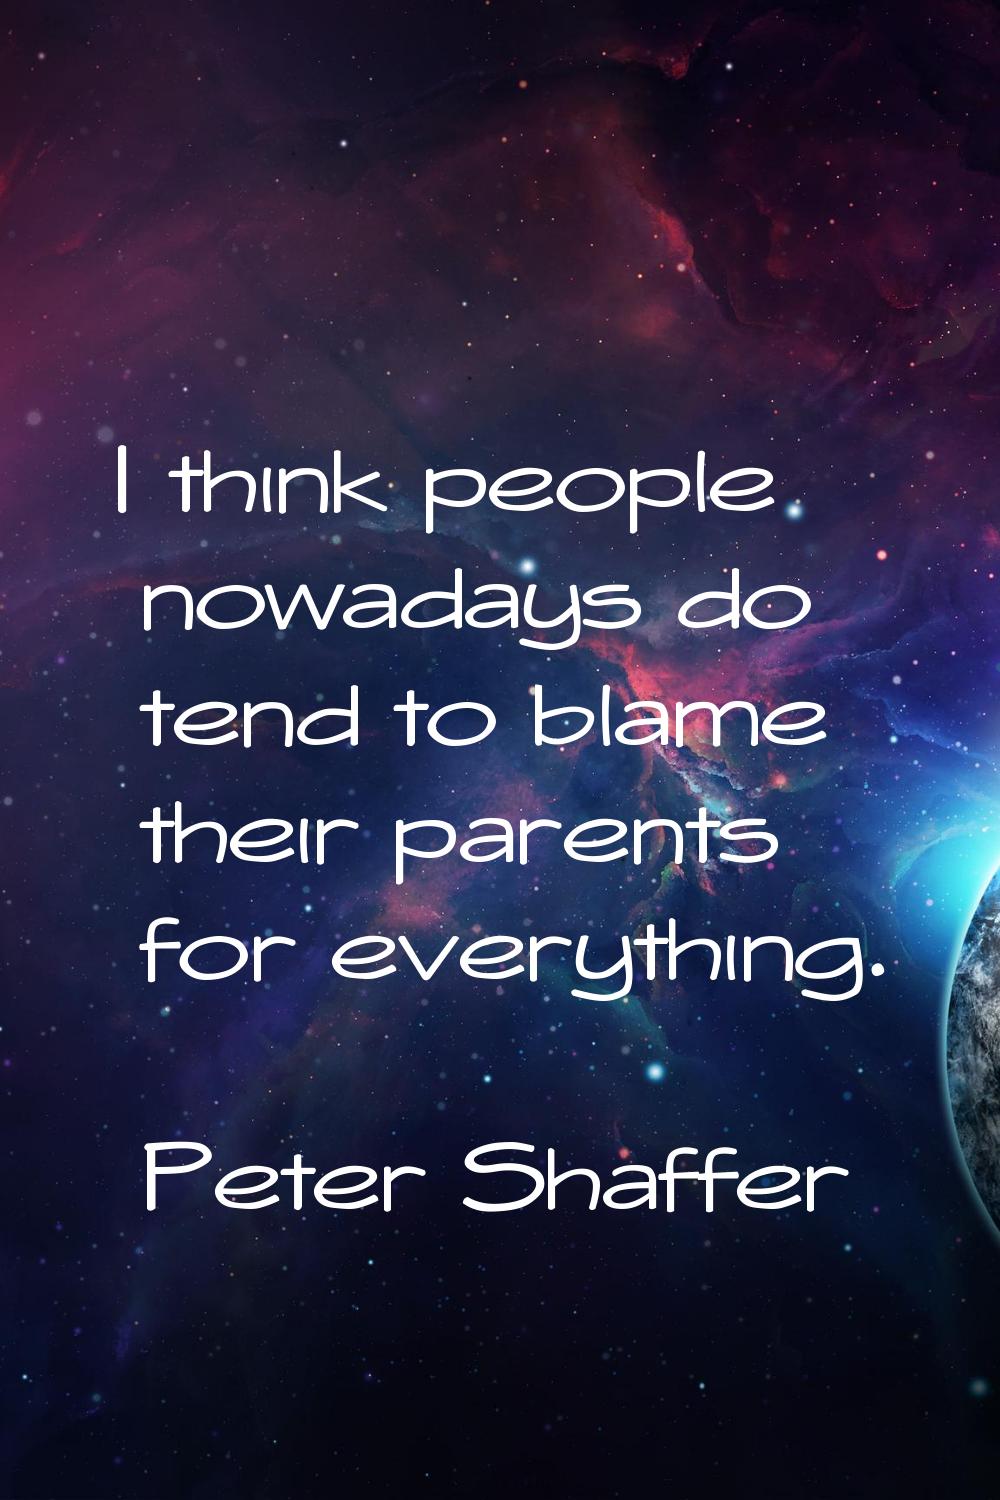 I think people nowadays do tend to blame their parents for everything.